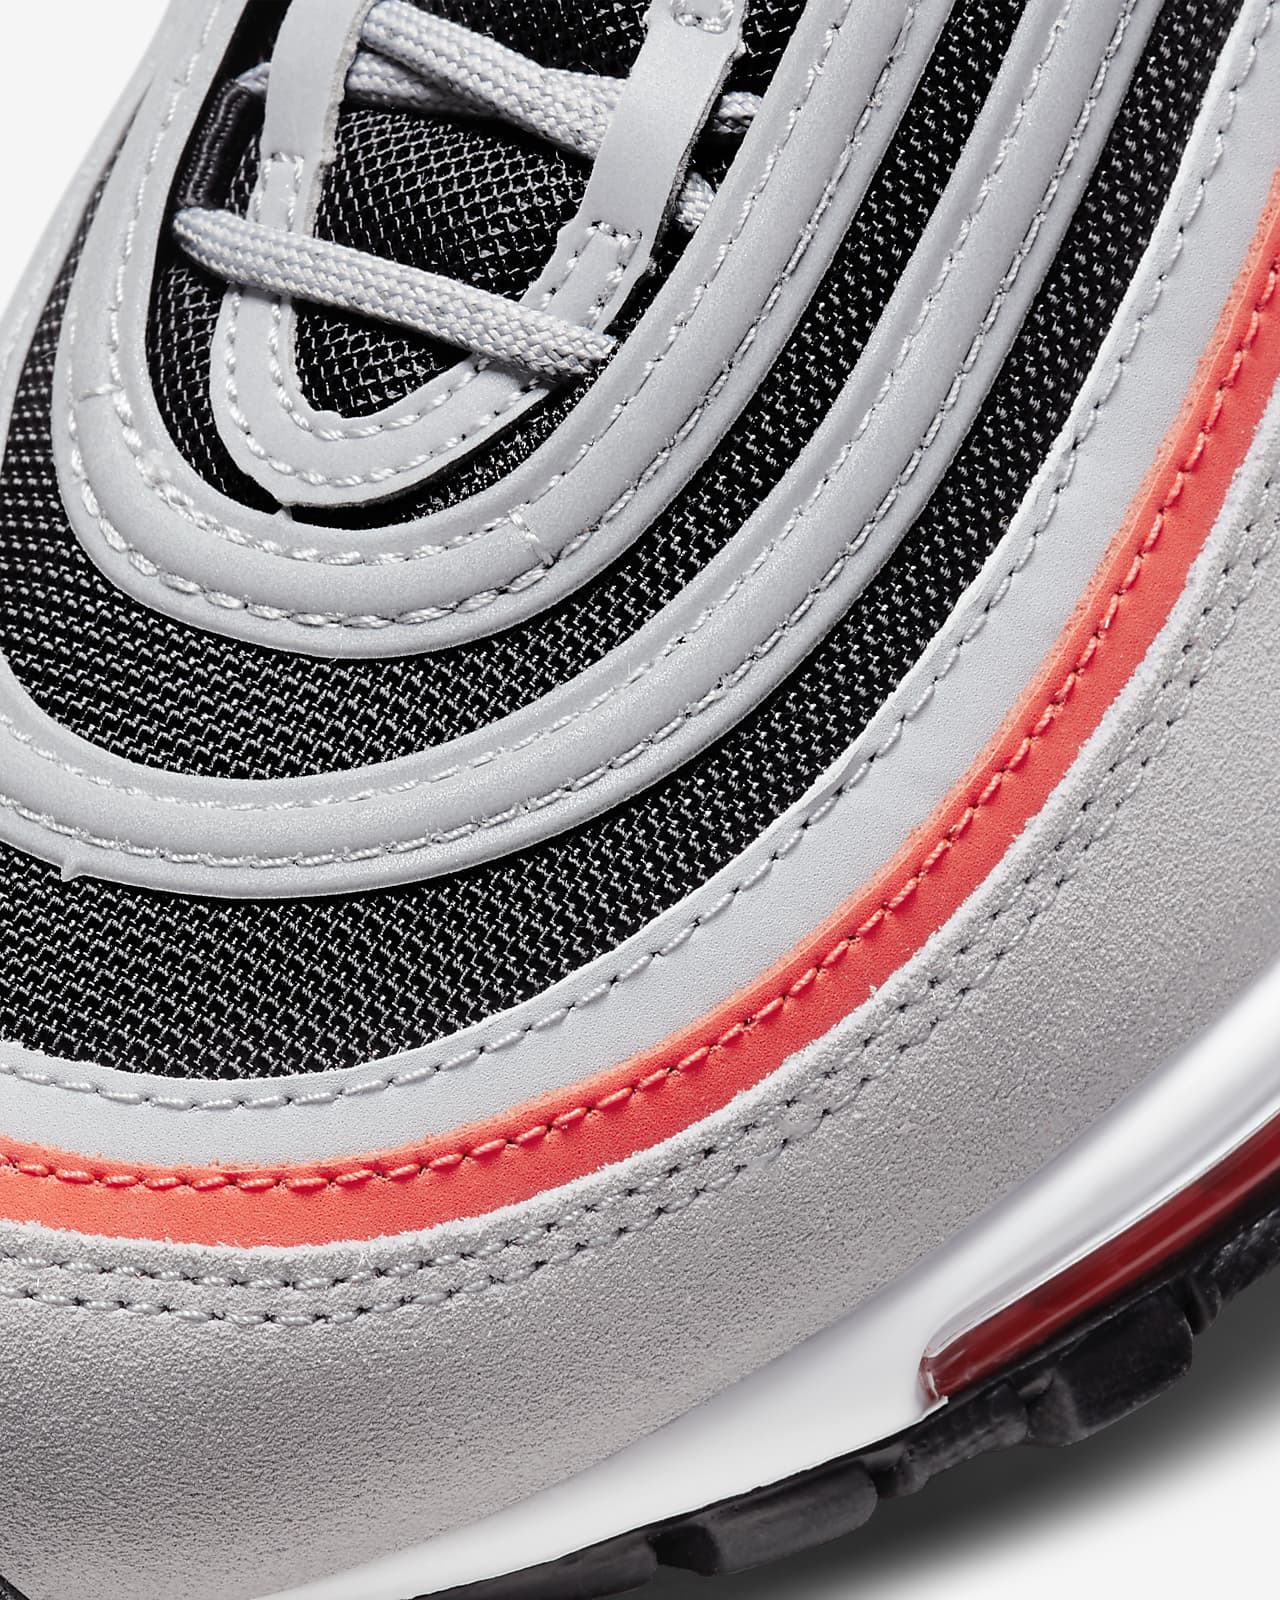 are air max 97 good for basketball